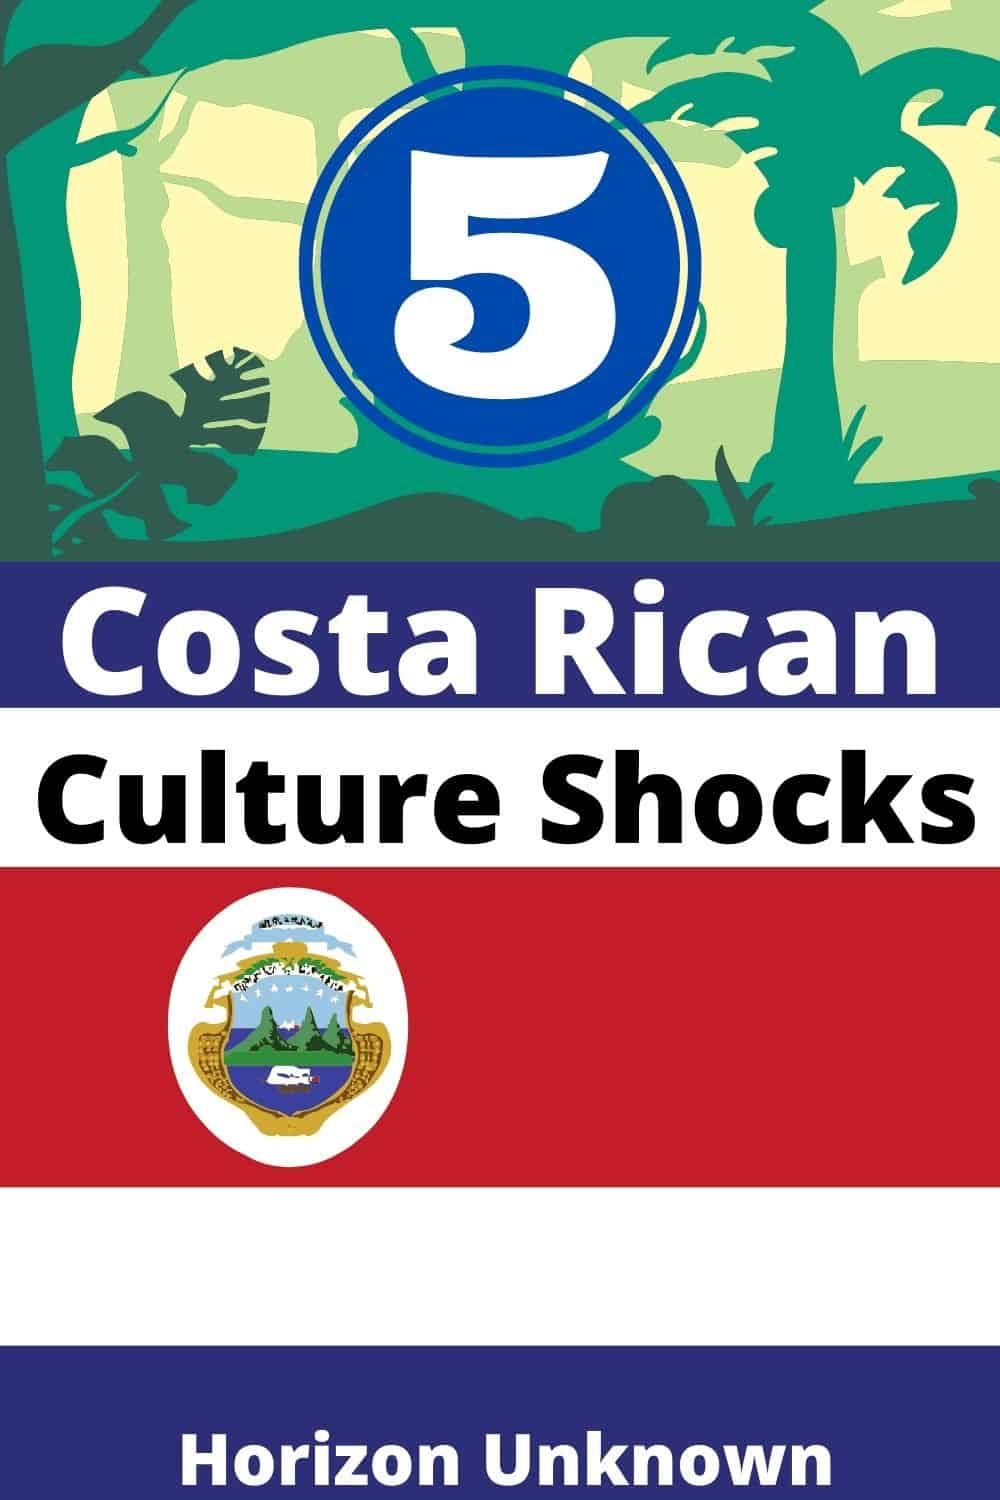 5 Costa Rica culture shocks you'll find when traveling